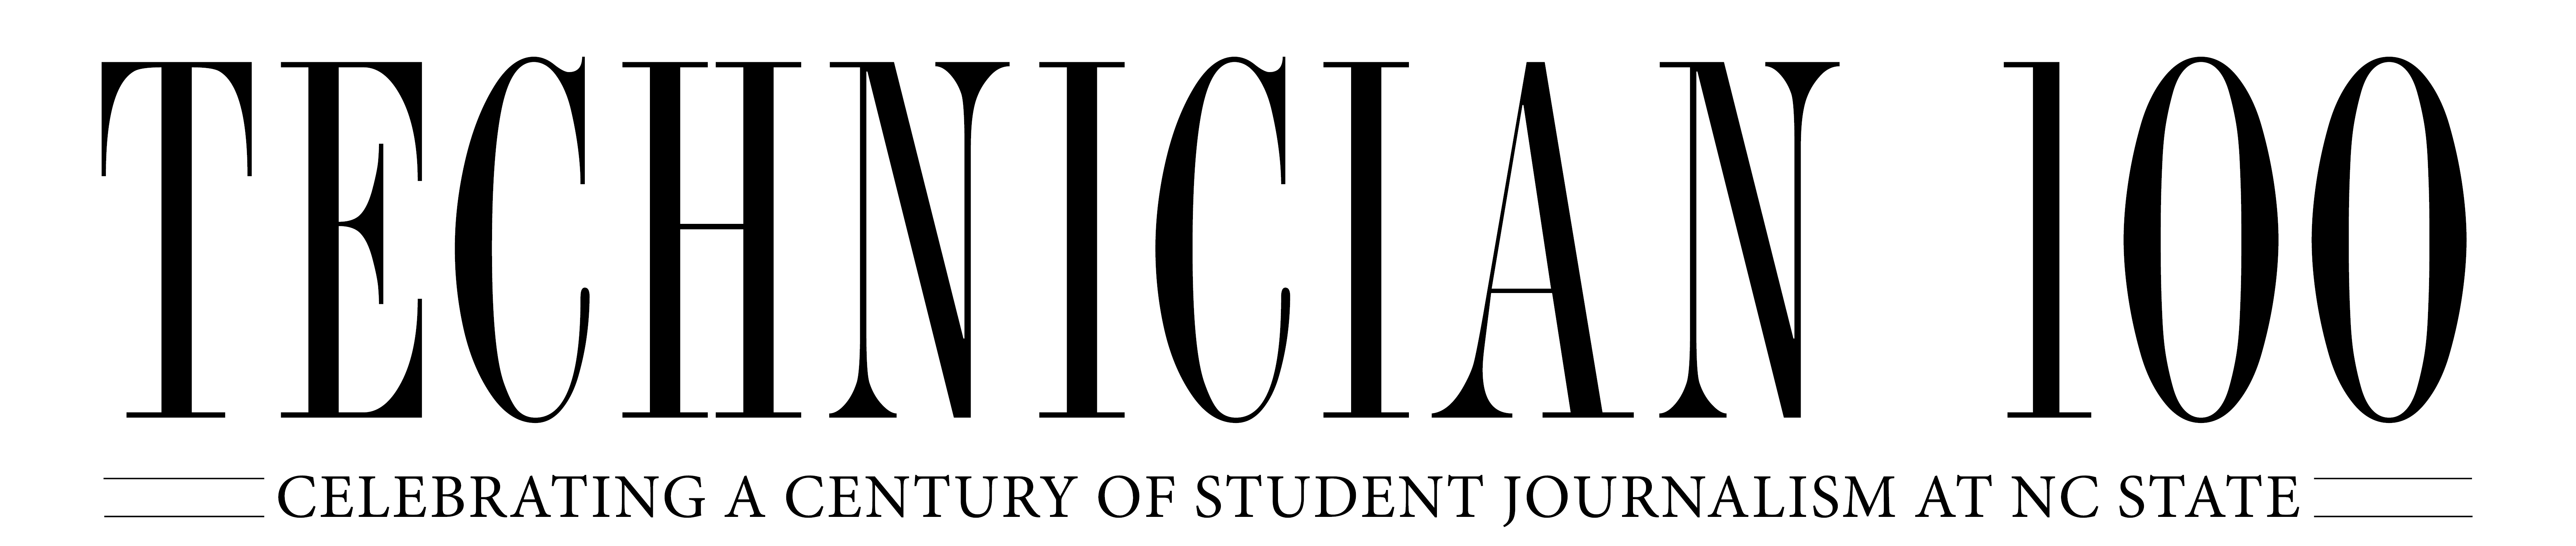 Technician 100: Celebrating a century of student journalism at NC State University since 1920